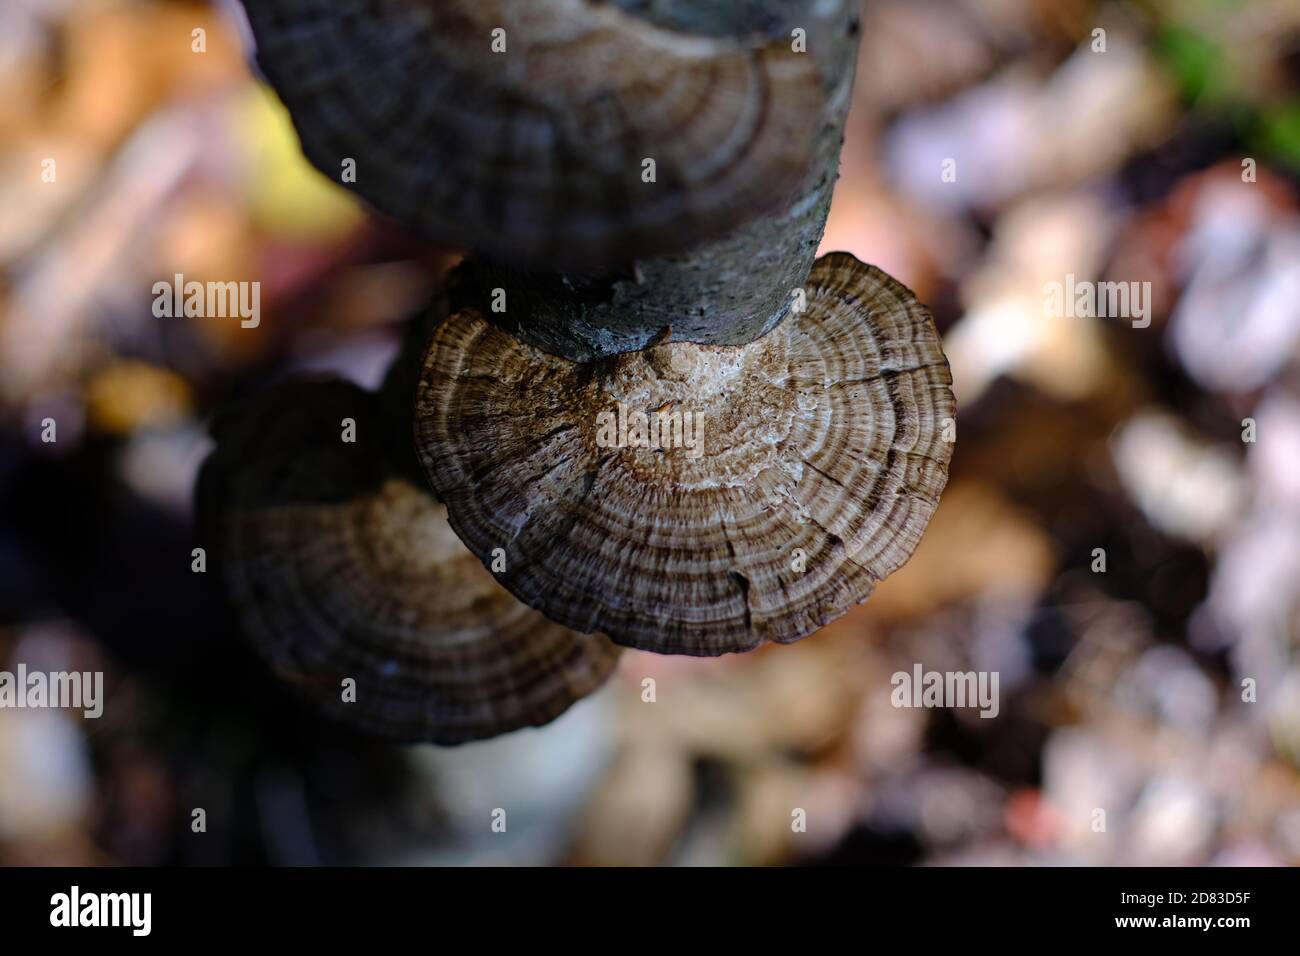 Turkey tail fungus (Trametes versicolor) growing on an upright tree stump  in a forest in Quebec. Wakefield, Canada. Stock Photo